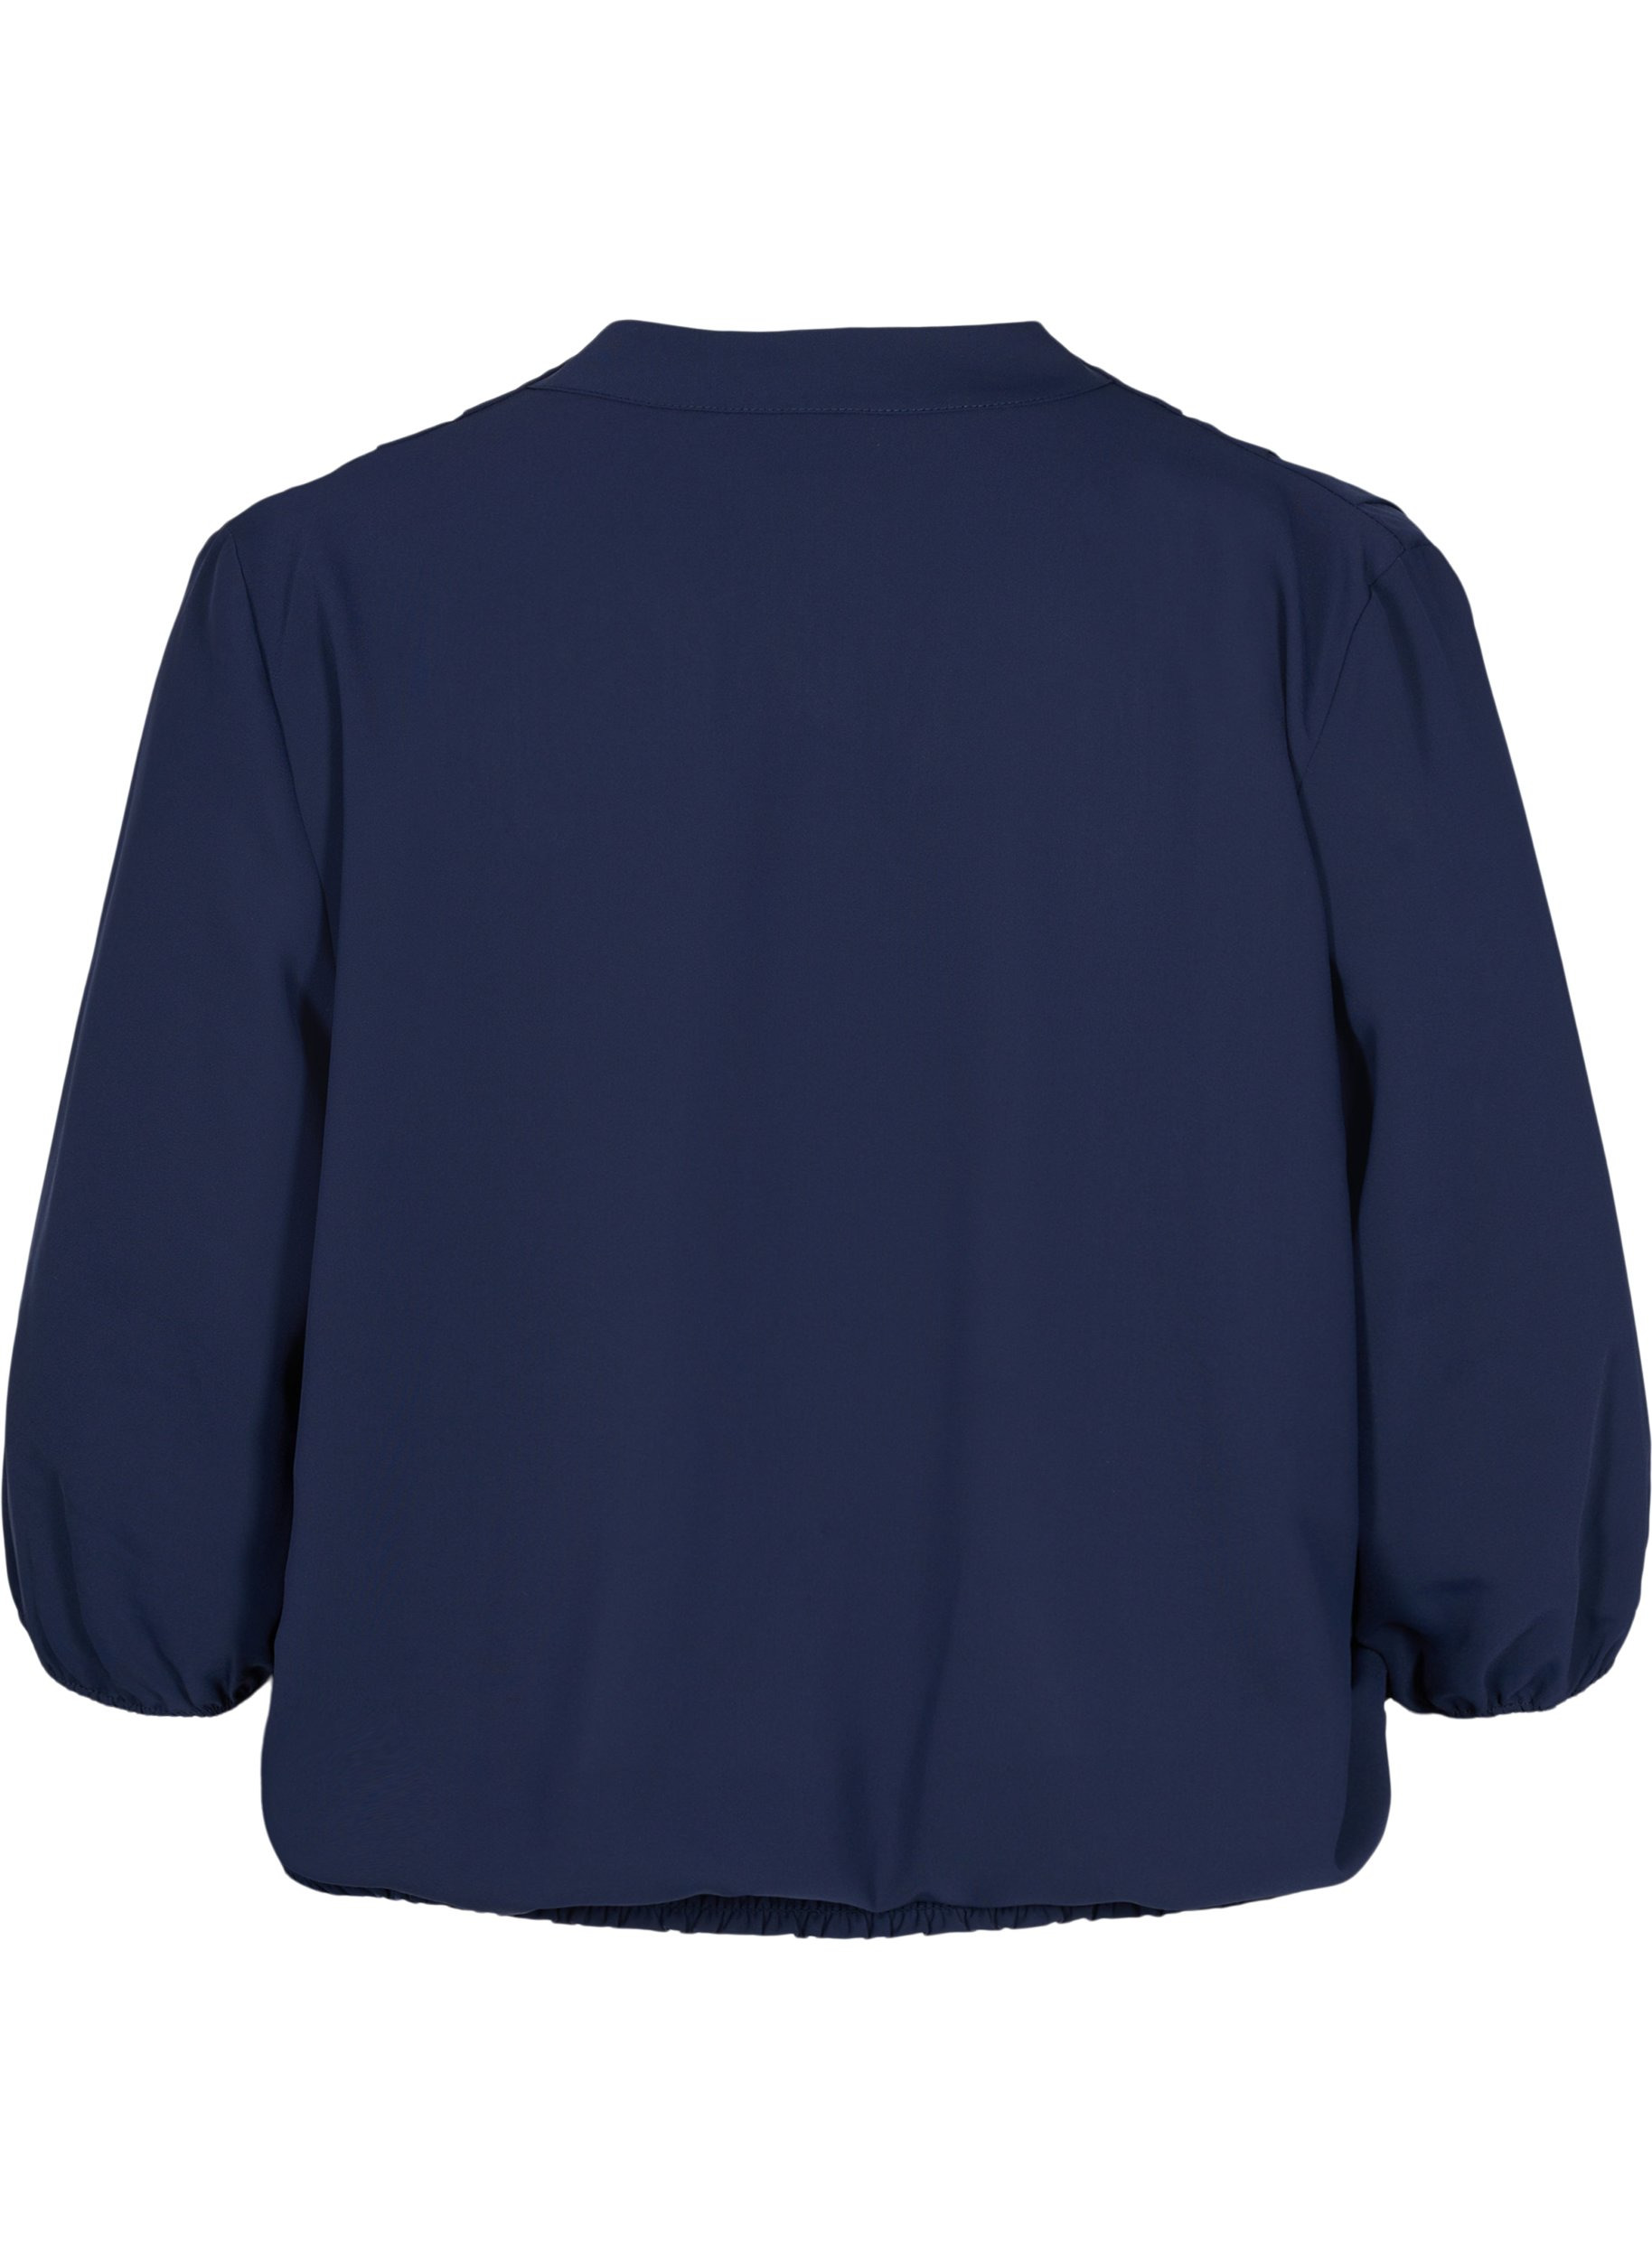 Wrap look blouse with v-neck and 3/4 sleeves, Navy Blazer, Packshot image number 1